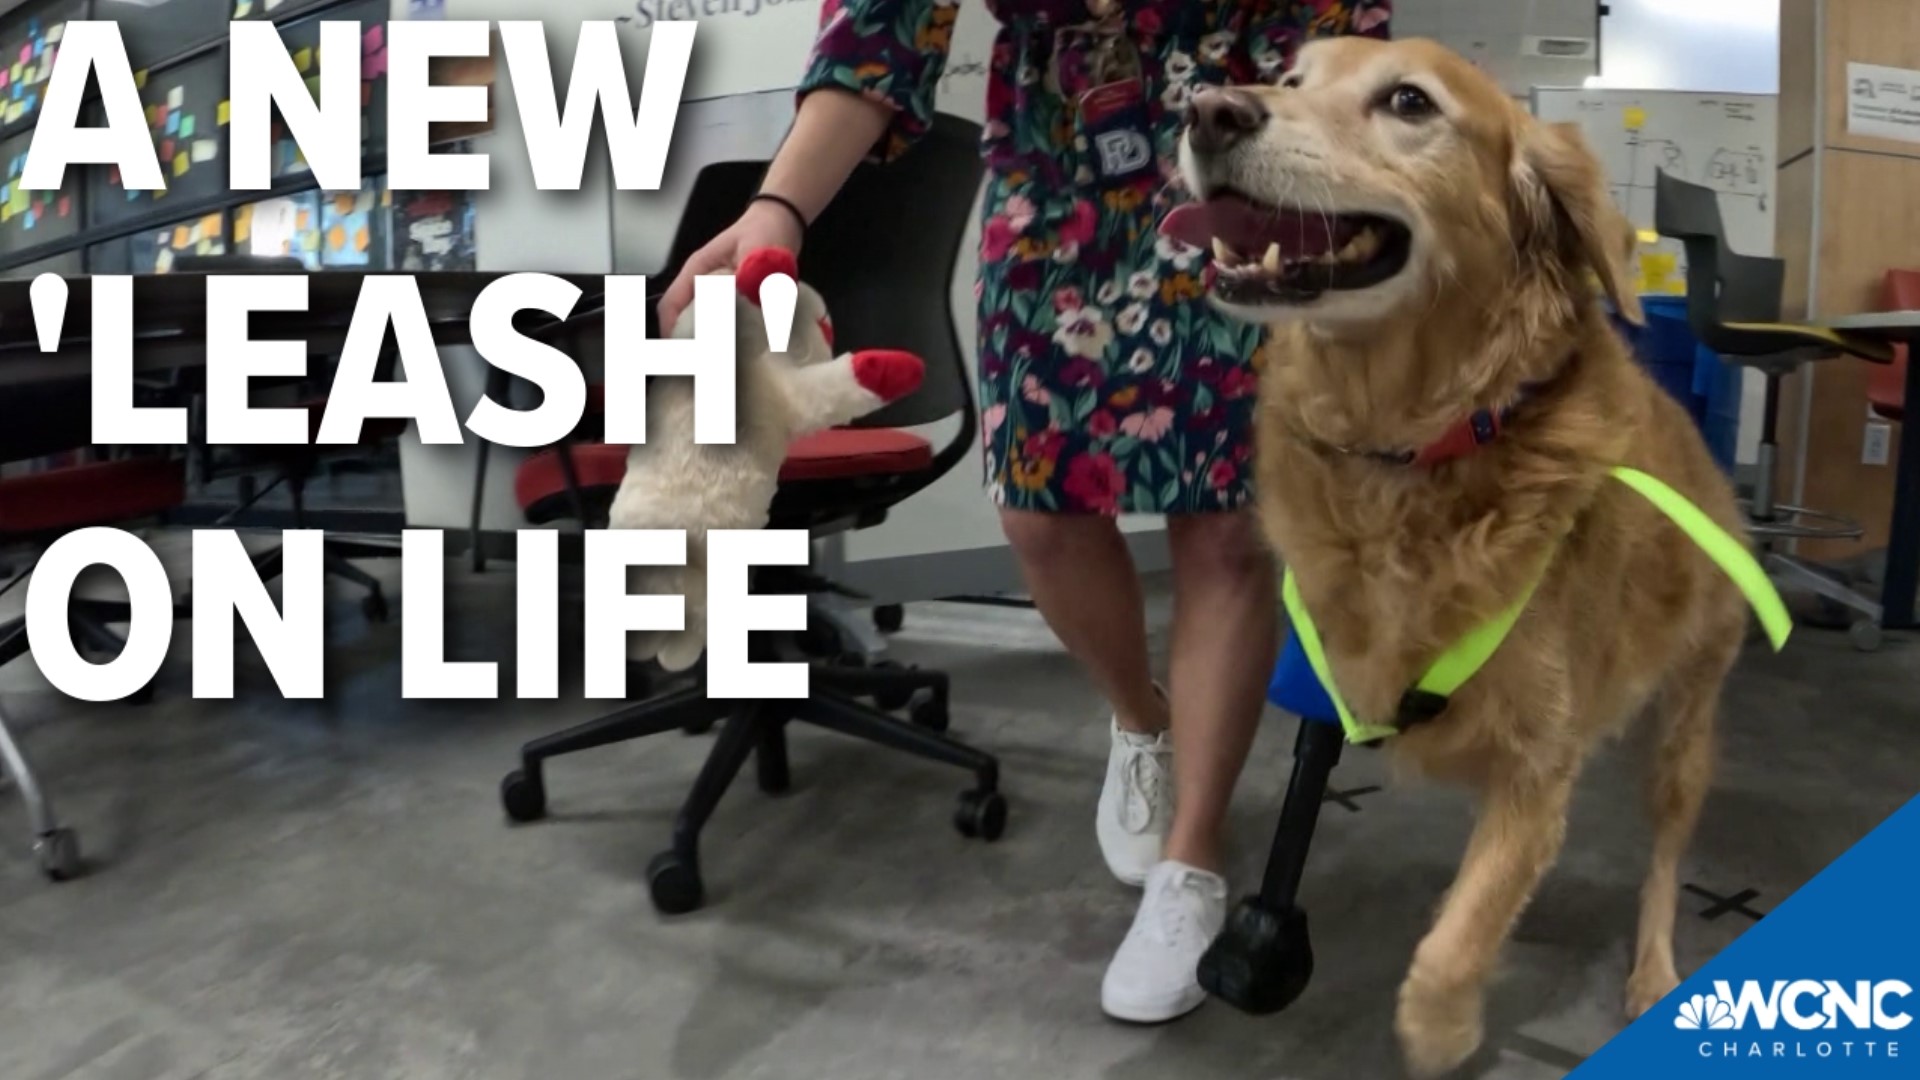 The students used a laser printer to create the prosthetic for the adorable golden retriever.